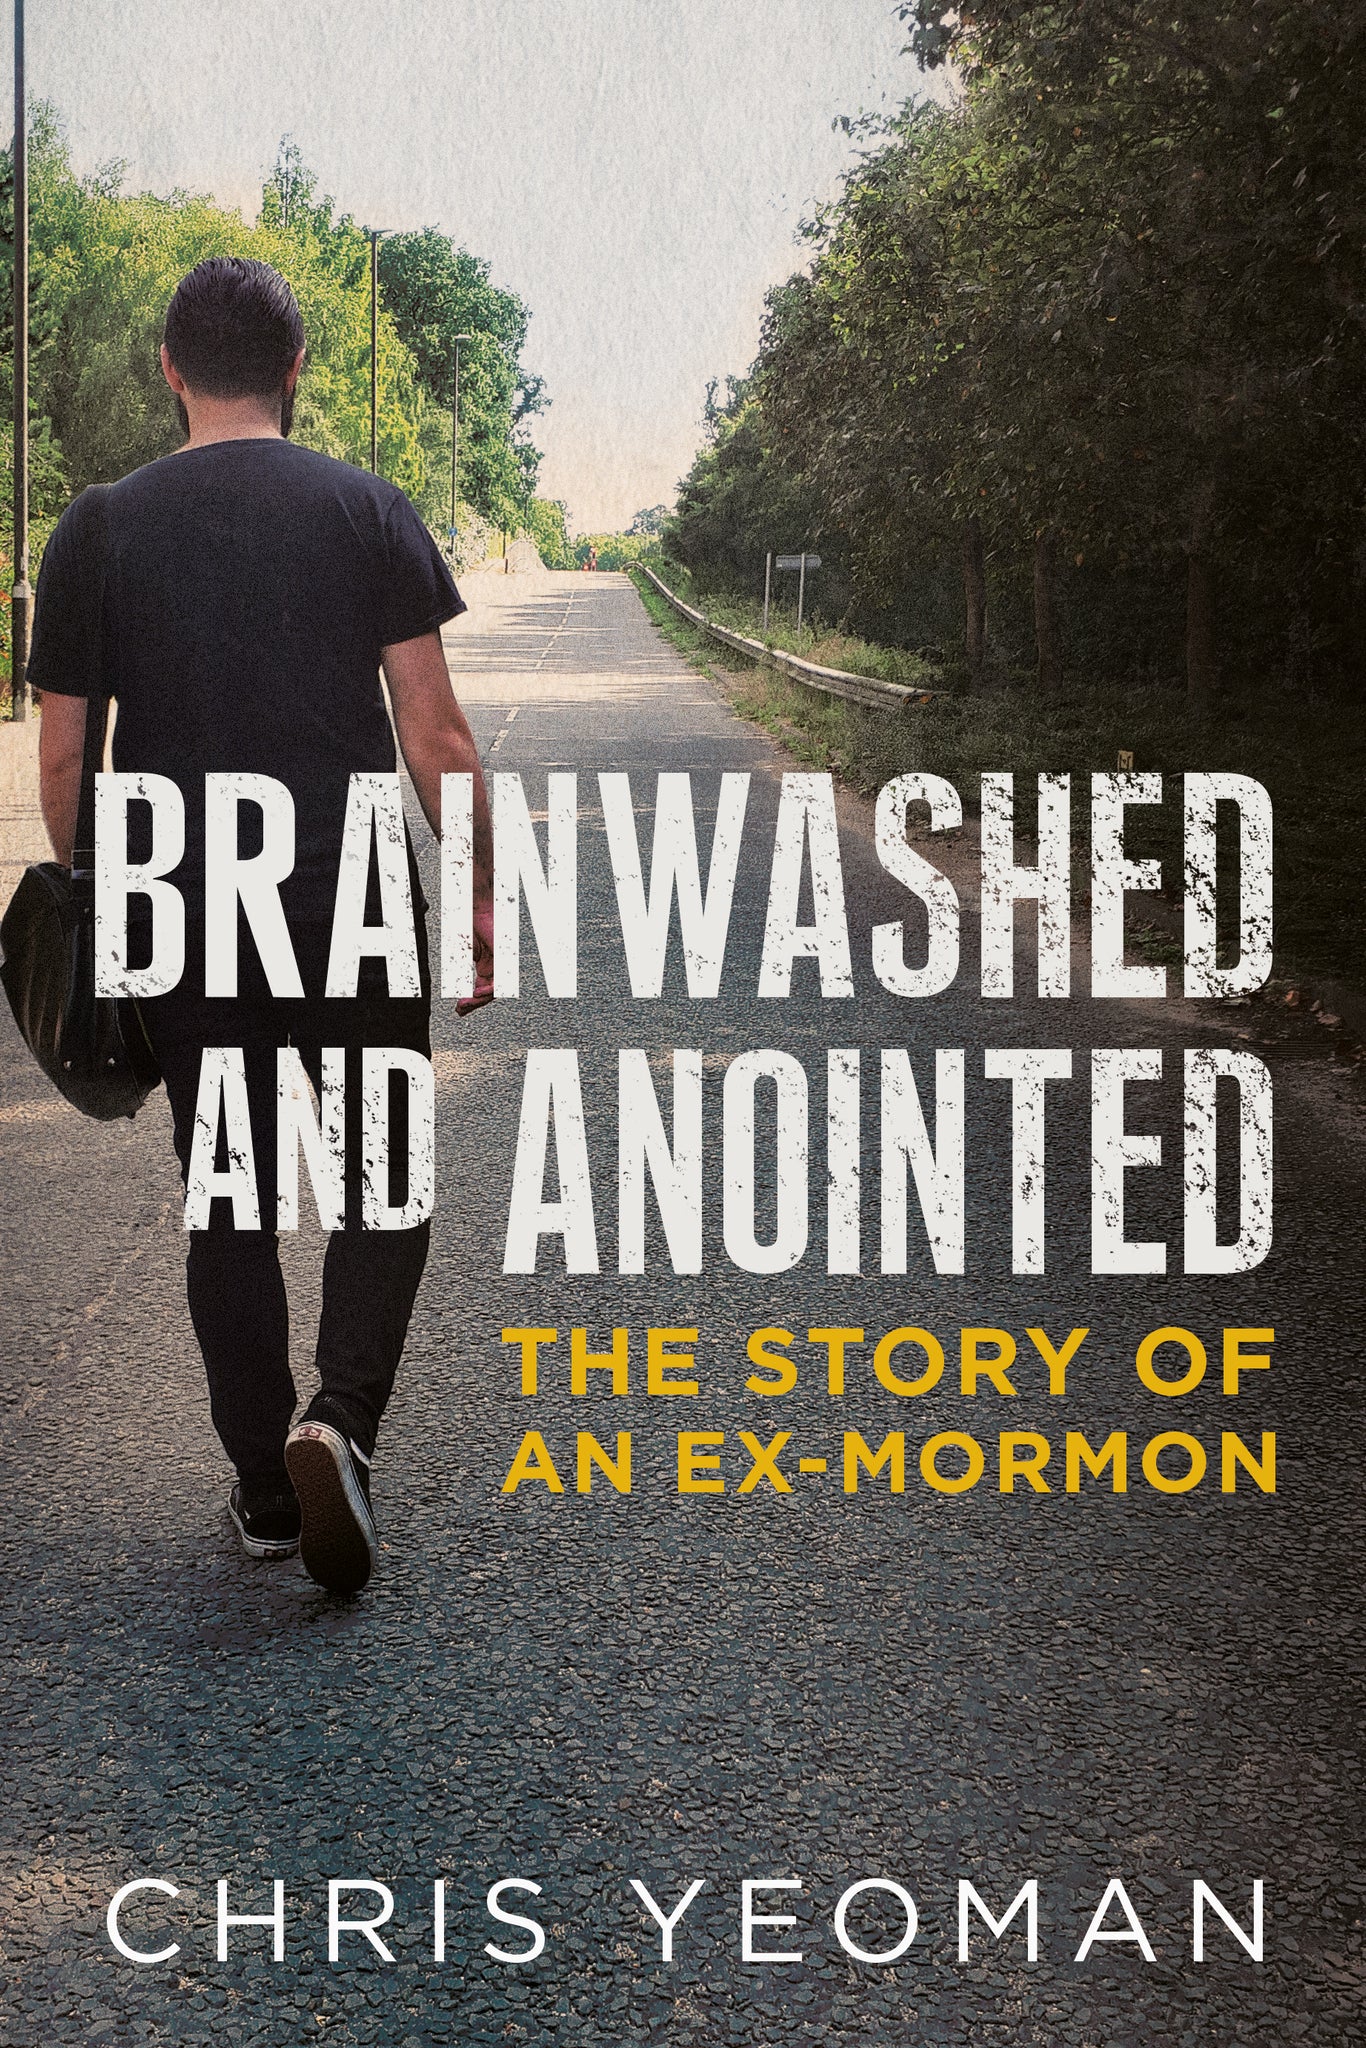 Brainwashed and Anointed: The Story of an Ex-Mormon - available now from Fonthill Media